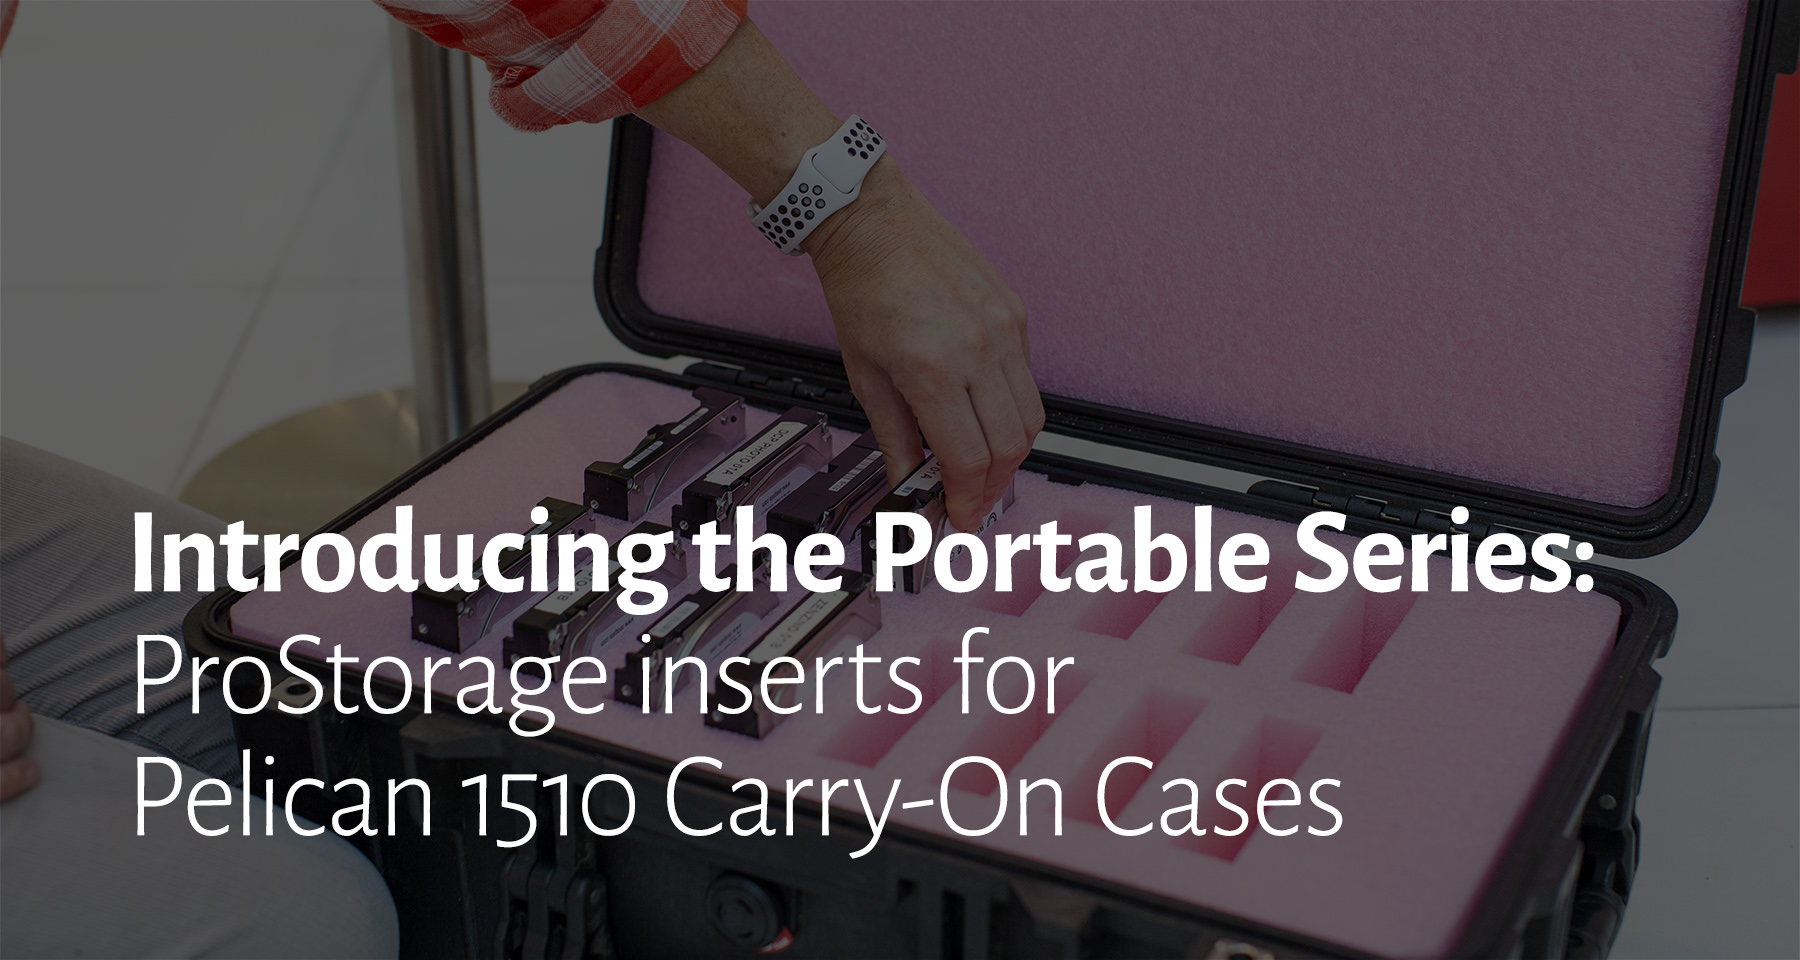 ProStorage Pelican 1510 Carry-On Case inserts